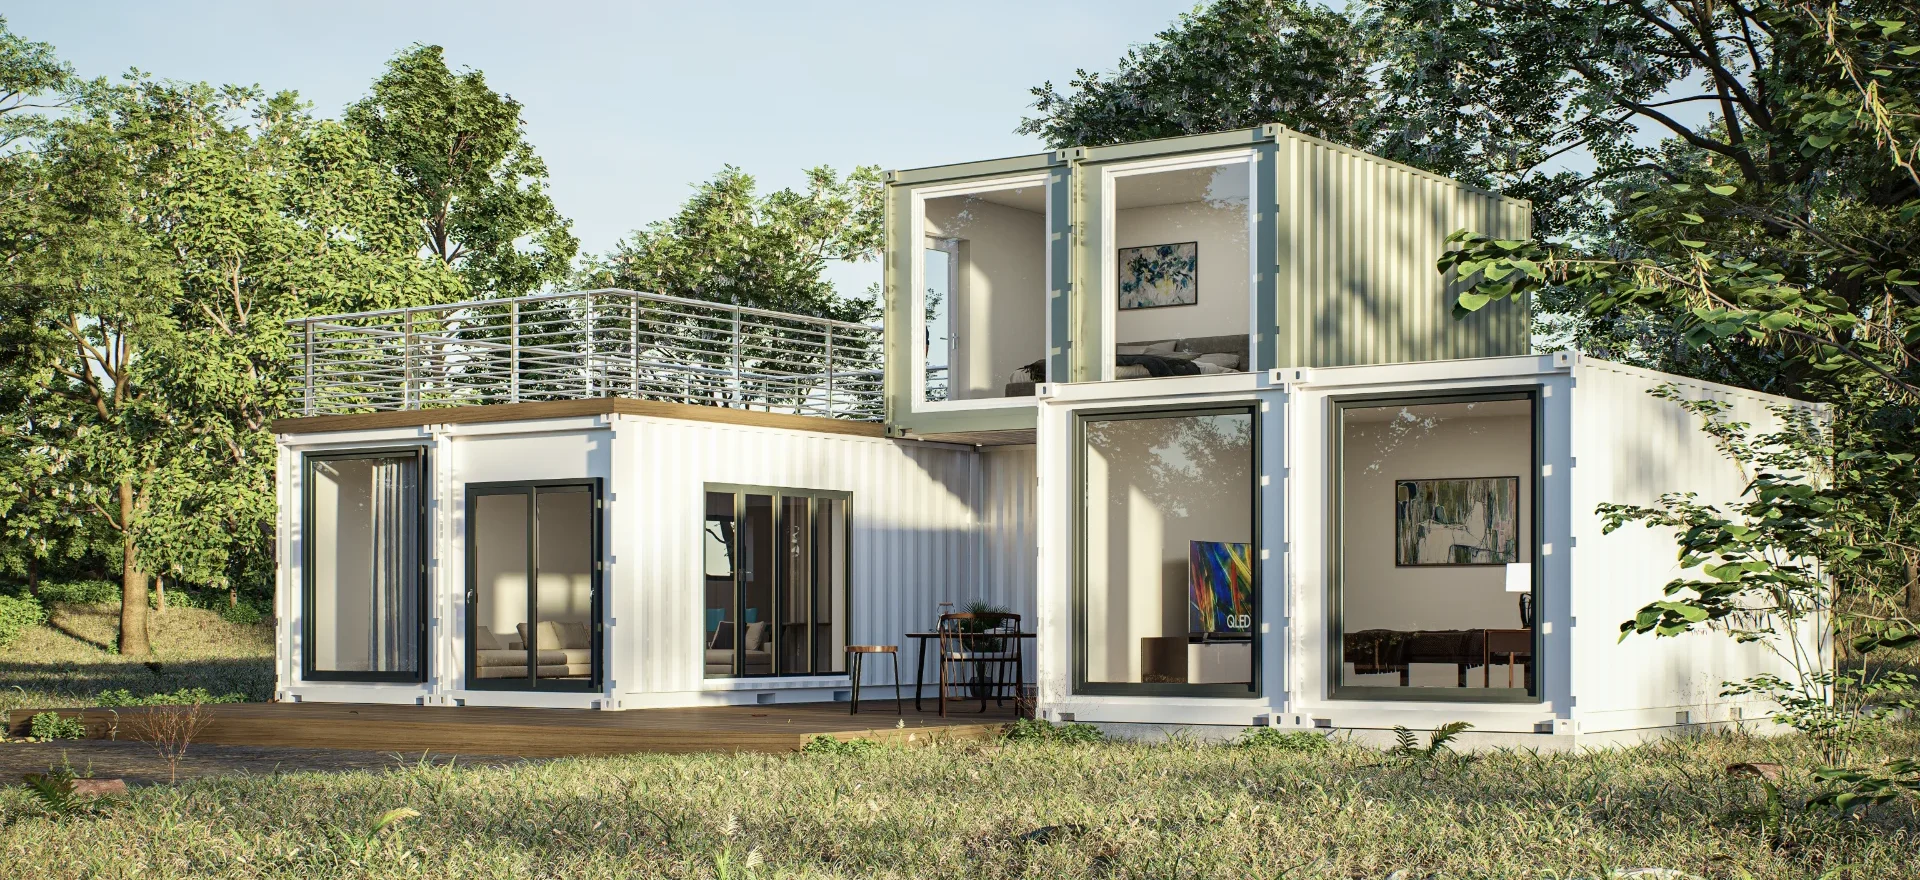 Love Container Homes Hero Image